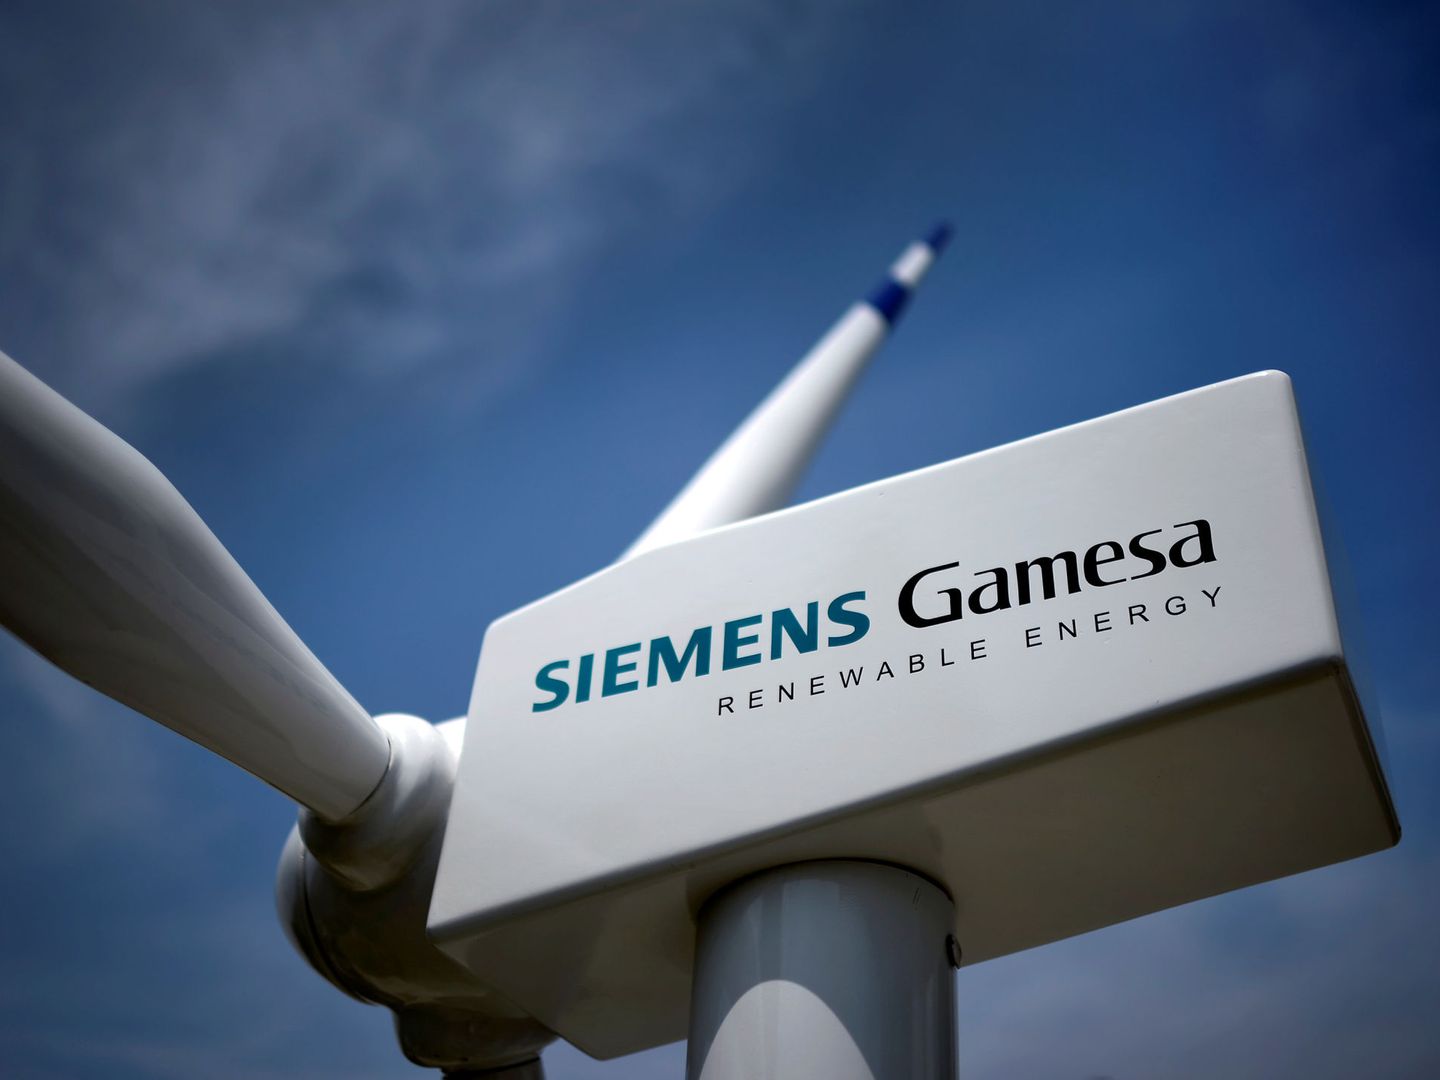 FILE PHOTO: A model of a wind turbine with the Siemens Gamesa logo is displayed outside the annual general shareholders meeting in Zamudio, Spain, June 20, 2017. REUTERS Vincent West File Photo